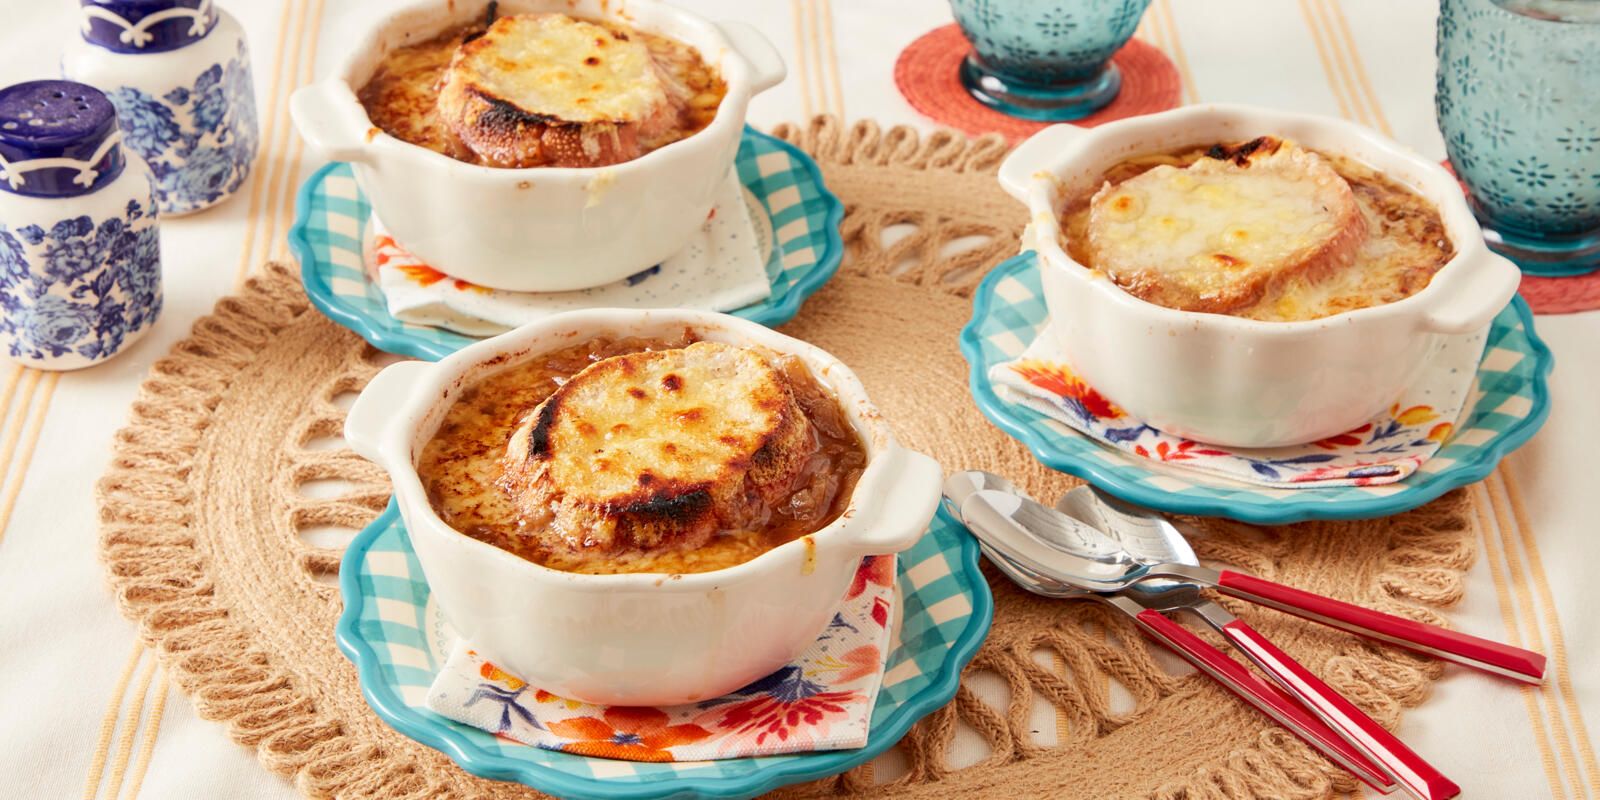 https://hips.hearstapps.com/hmg-prod/images/french-onion-soup-recipe-2-65947b60a6d17.jpg